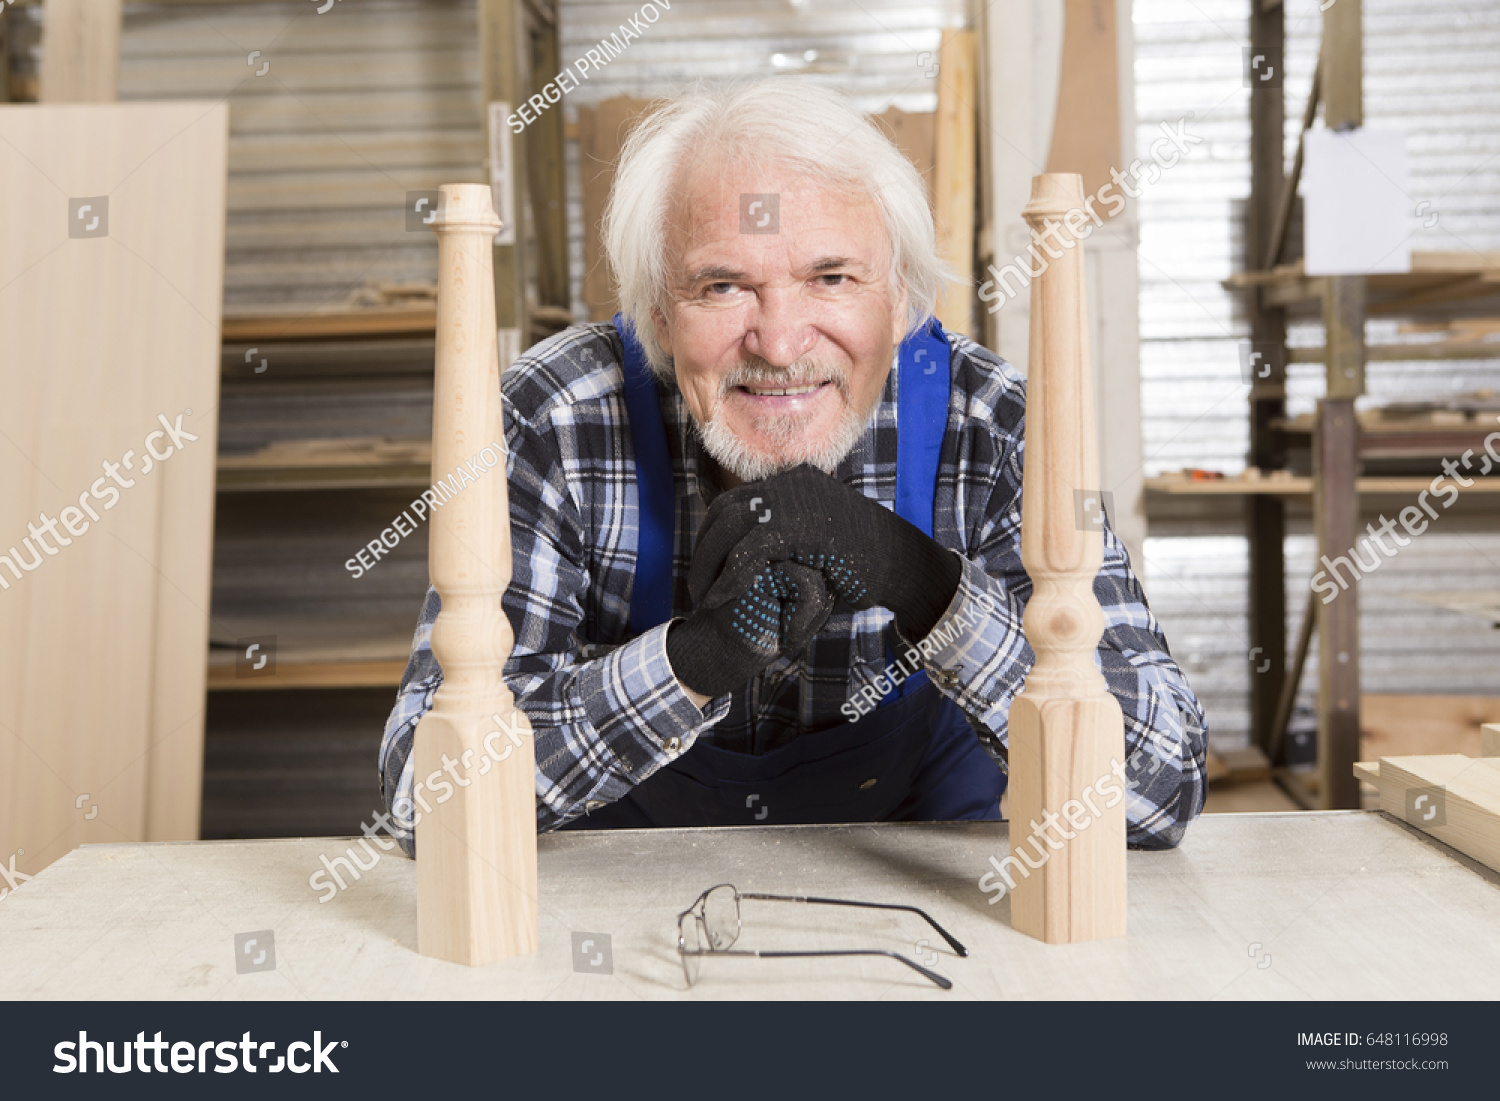 Serious furniture designer carefully polishes the chair frame, which he is busy manufacturing in his woodwork workshop, with shelves of wooden objects and patterns behind him #648116998